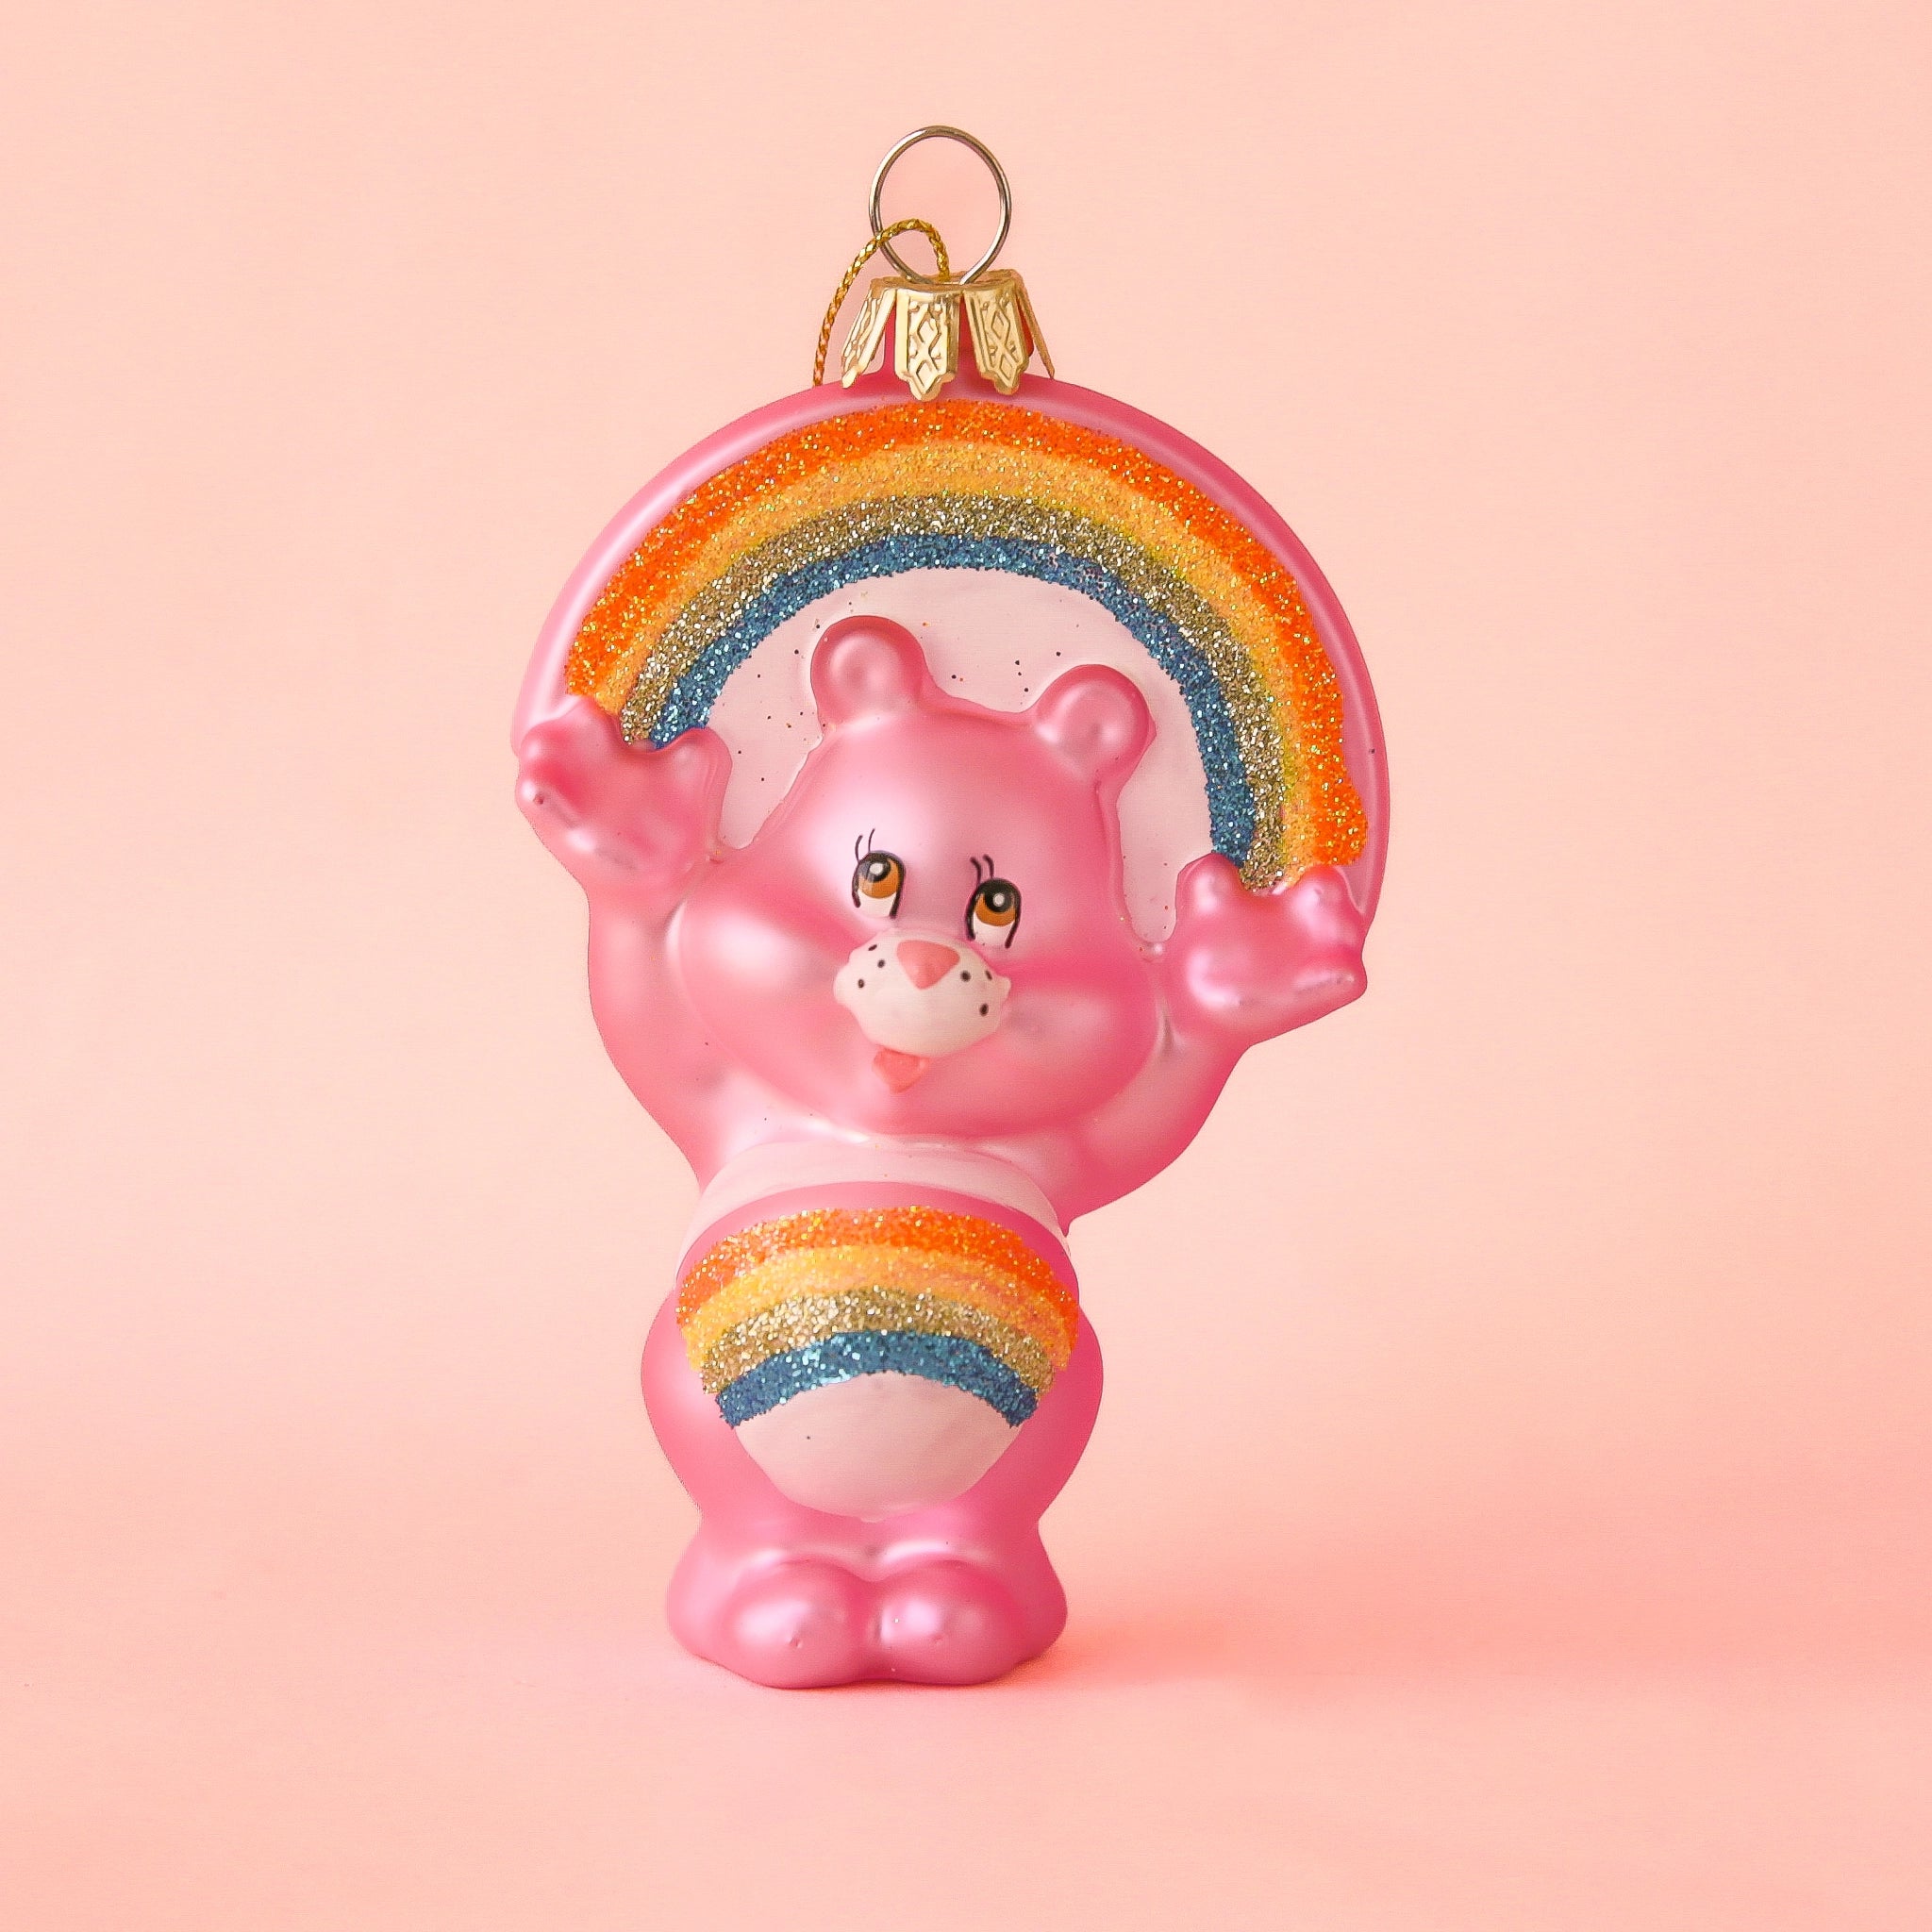 On a peachy background is a pink glass bear shaped ornament with a rainbow on its stomach and arched over its head. 